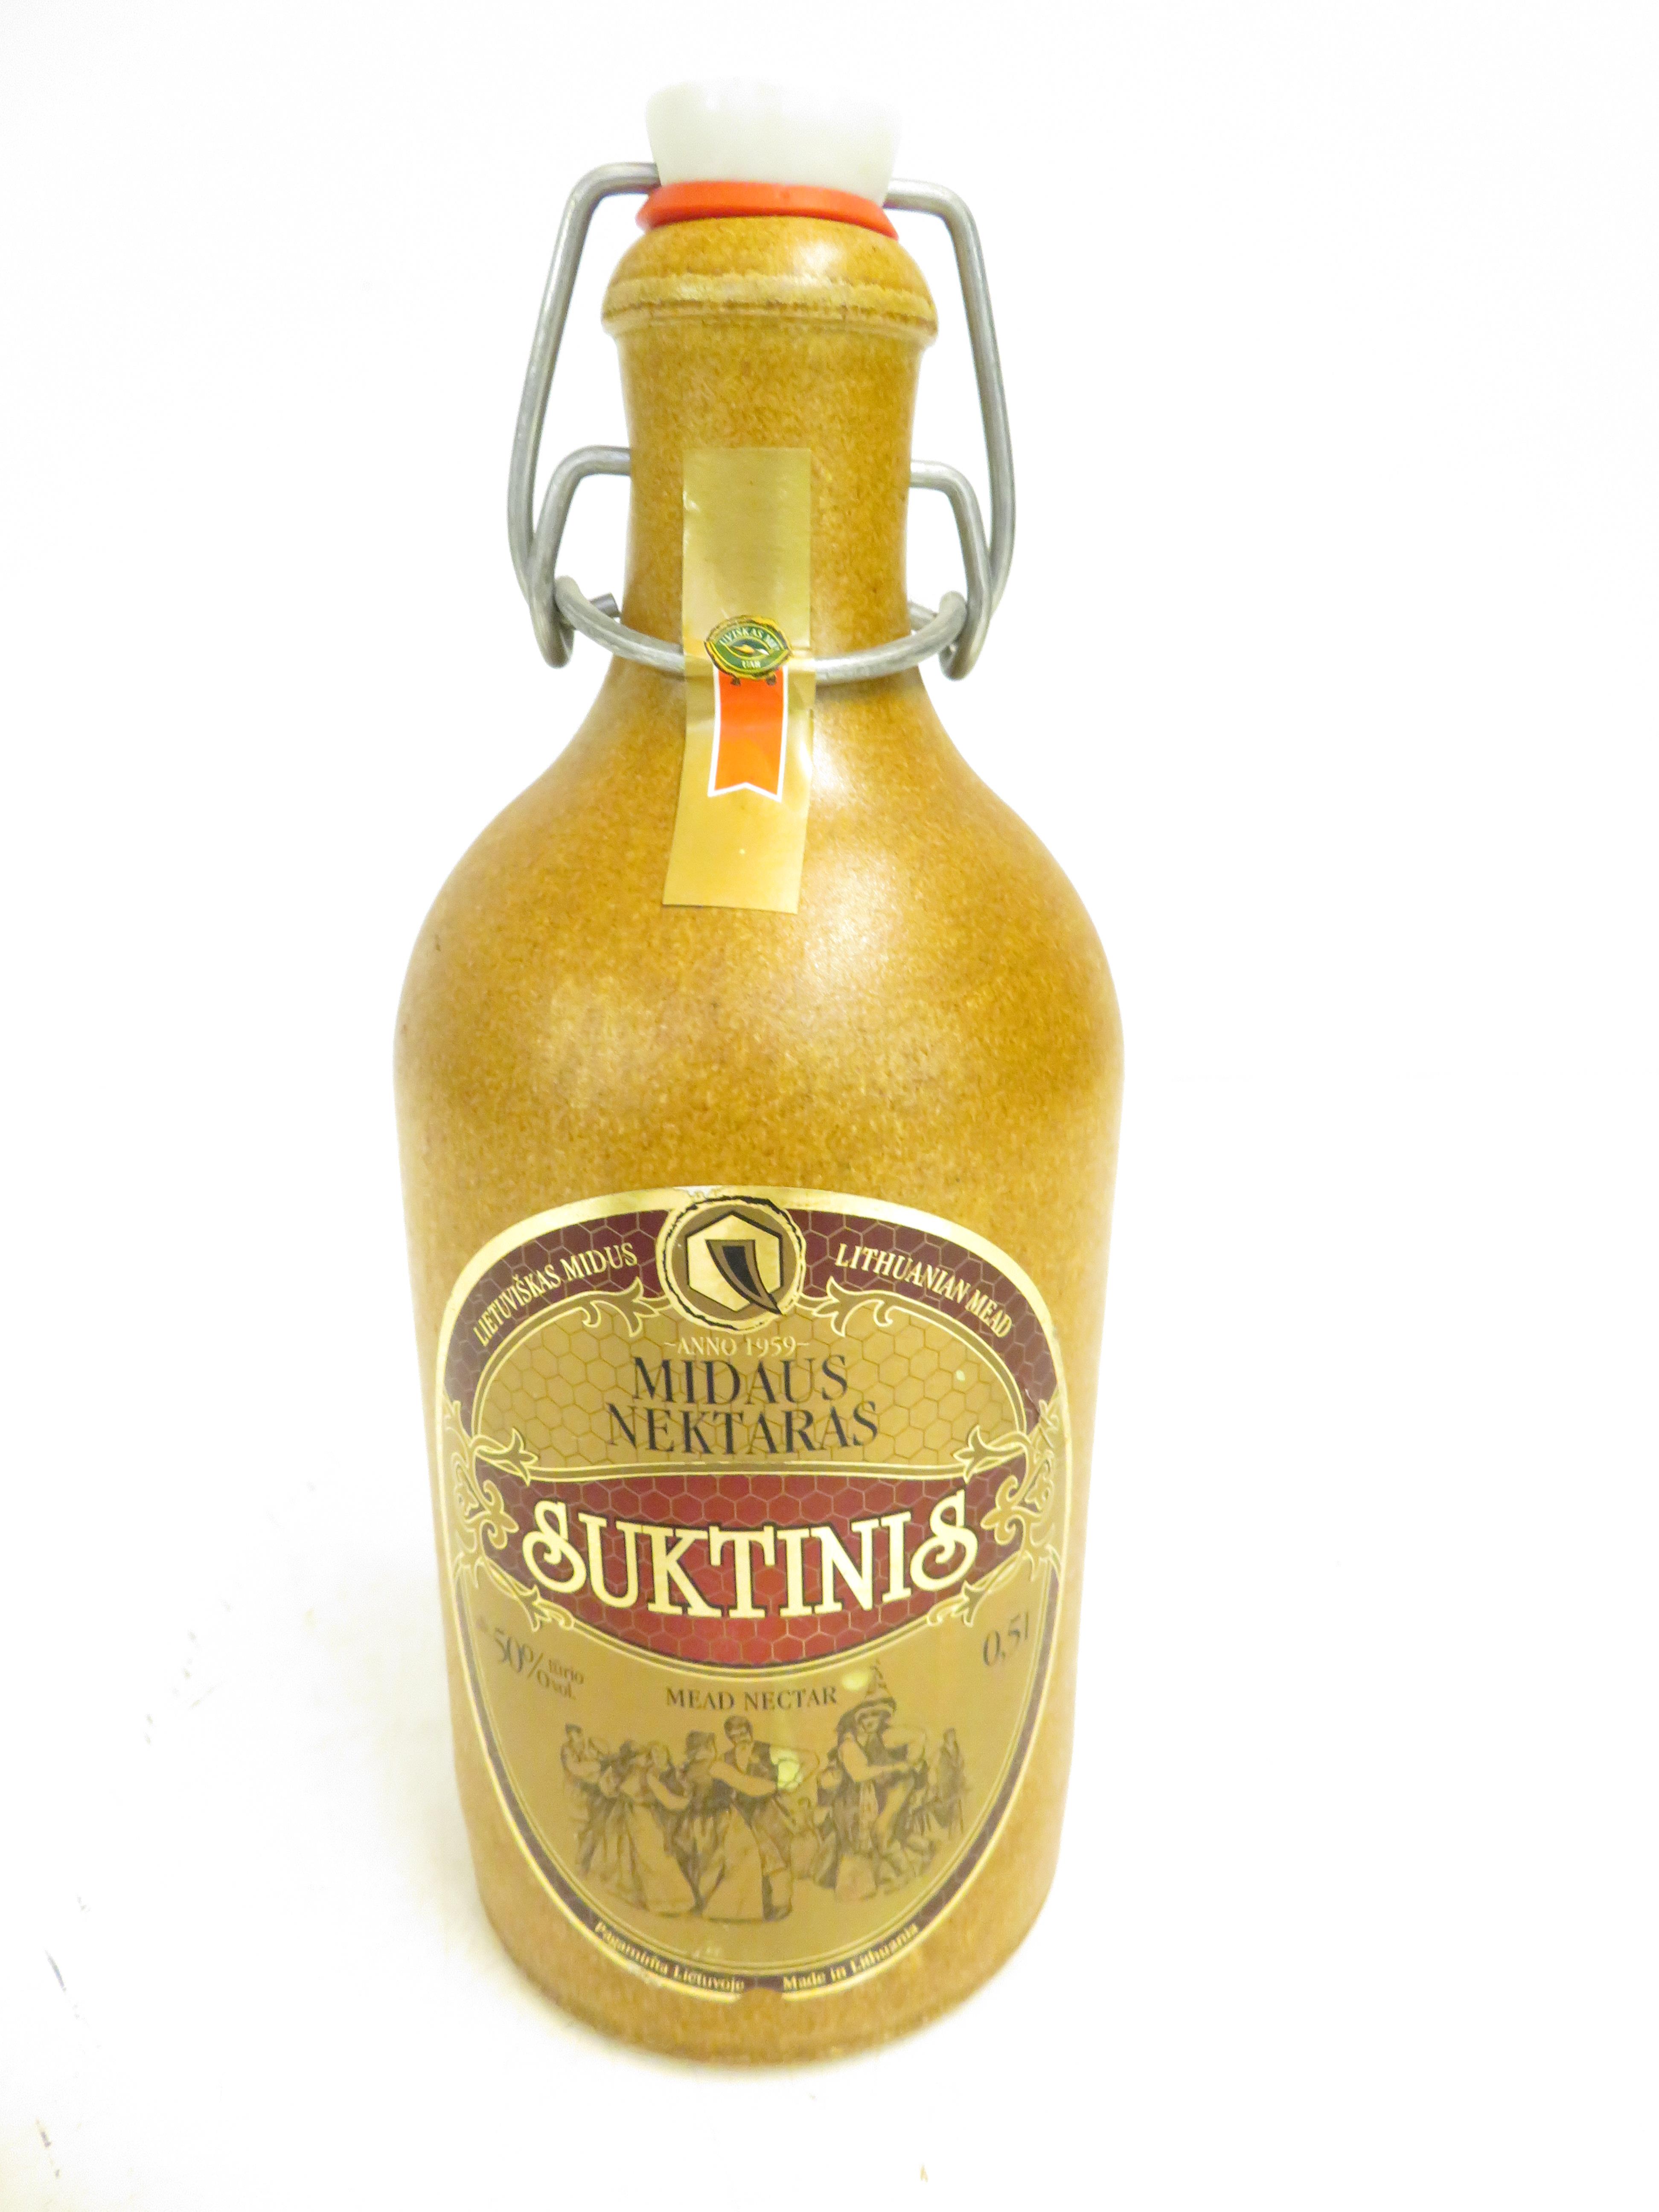 Suktinis Mead Nectar, 0.51, 50% proof